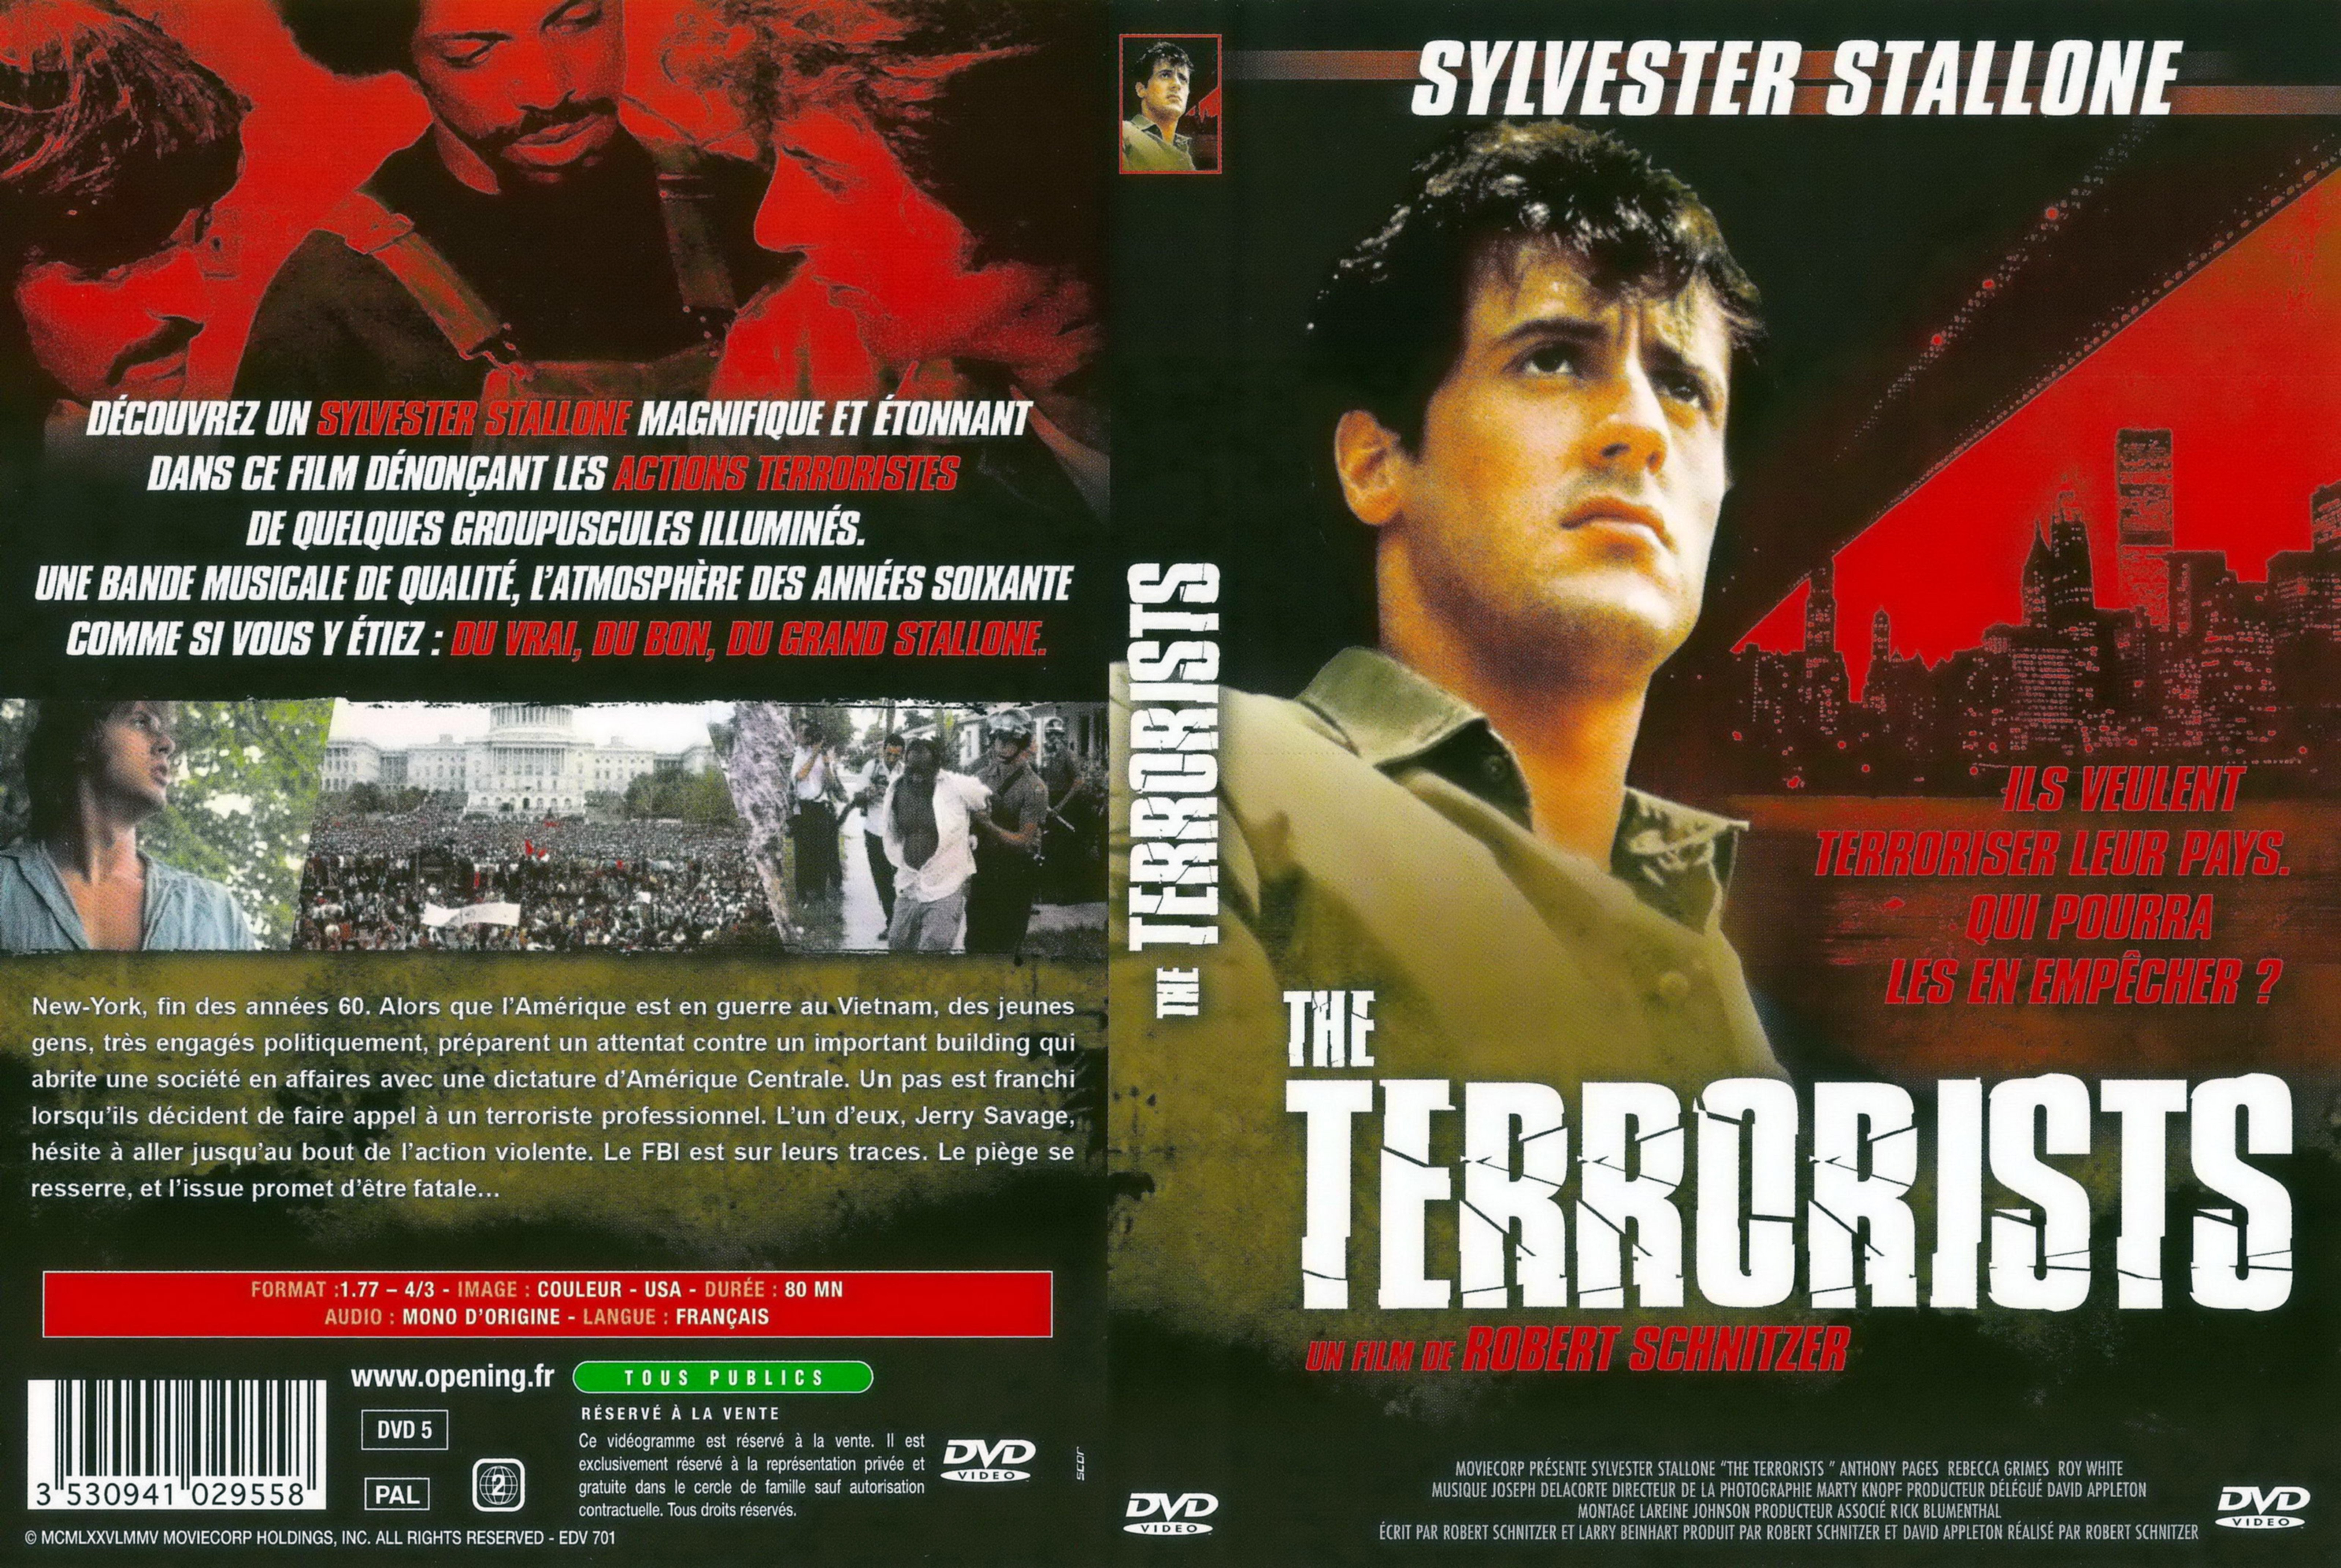 Jaquette DVD The terrorists